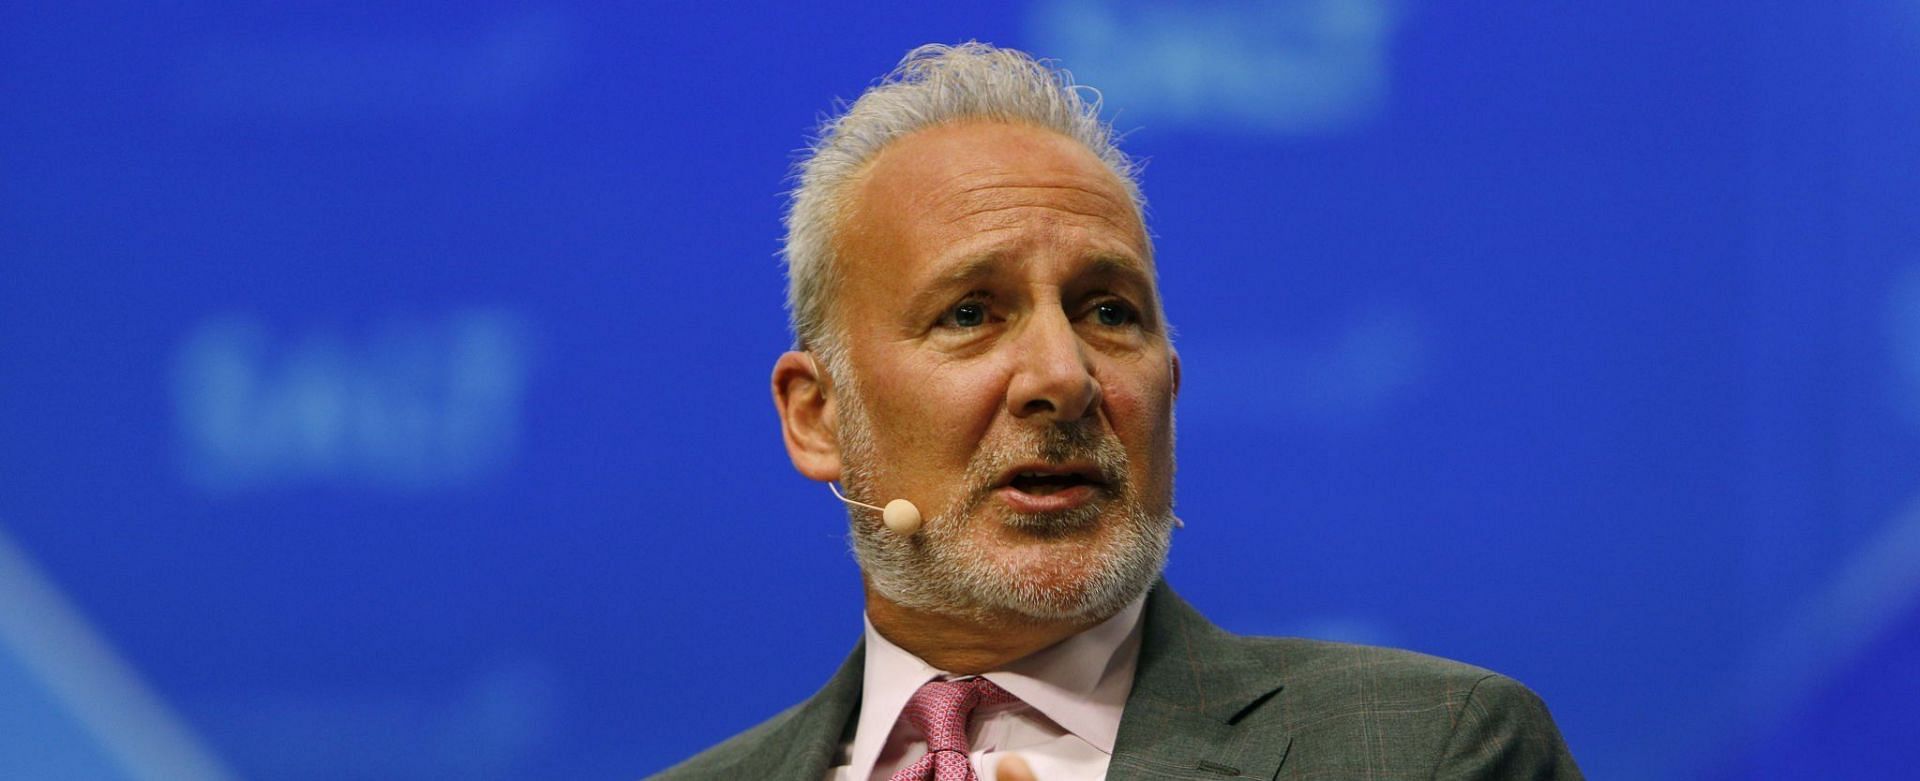 Peter Schiff is the CEO and chief global strategist of Euro Pacific Capital (Image via Joe Buglewicz/Getty Images)